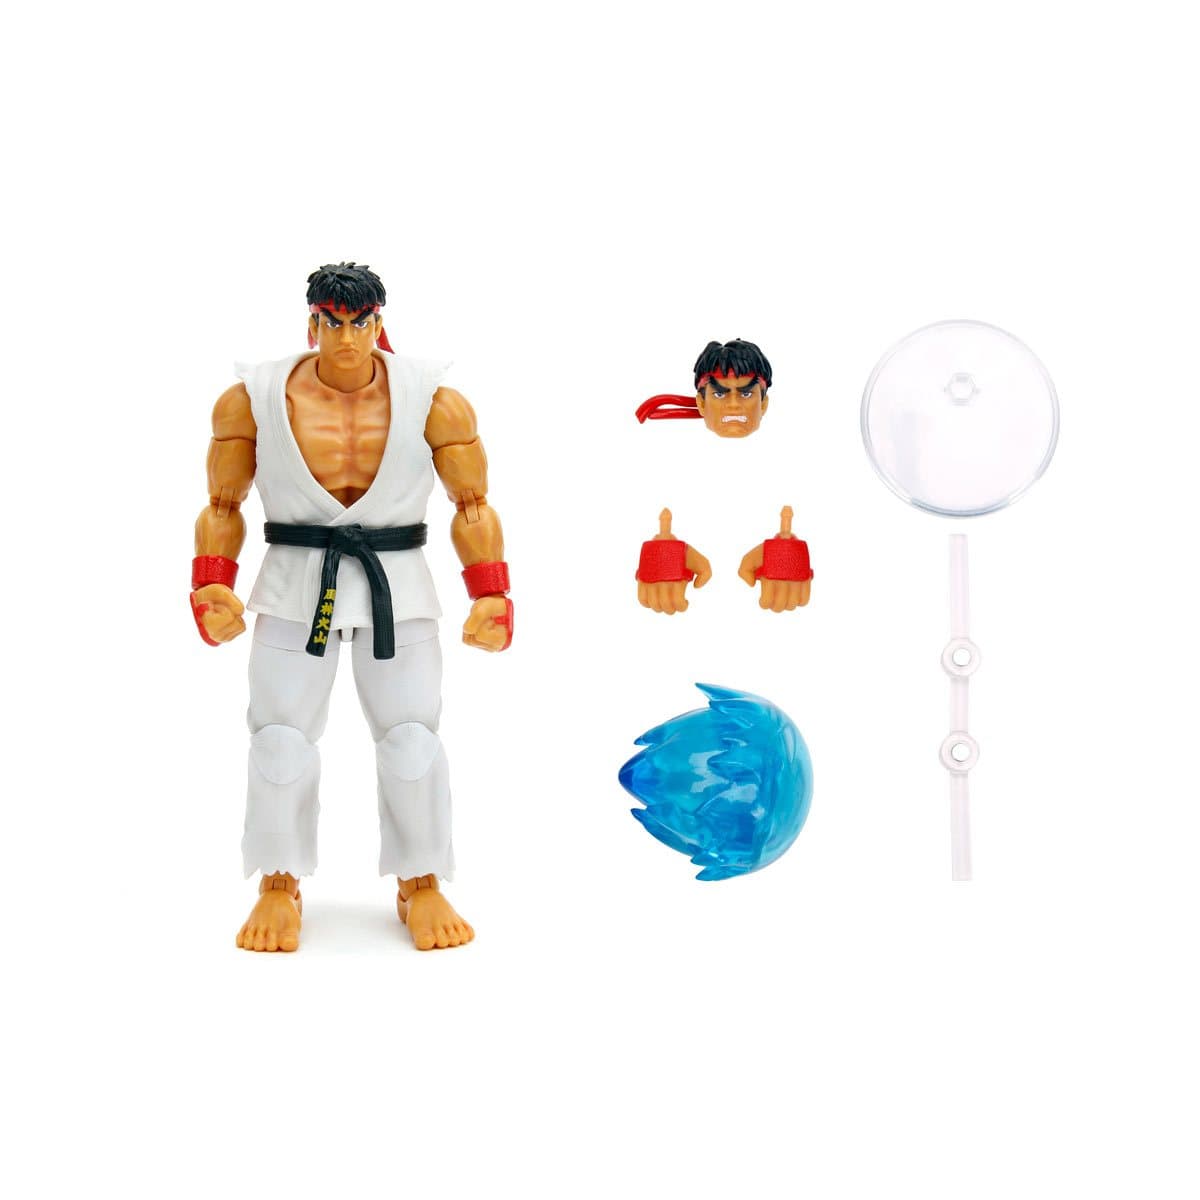 Jada-Toys-Ultra-Street-Fighter-II-Ryu-Action-Figure-TOYS-COLLECTible